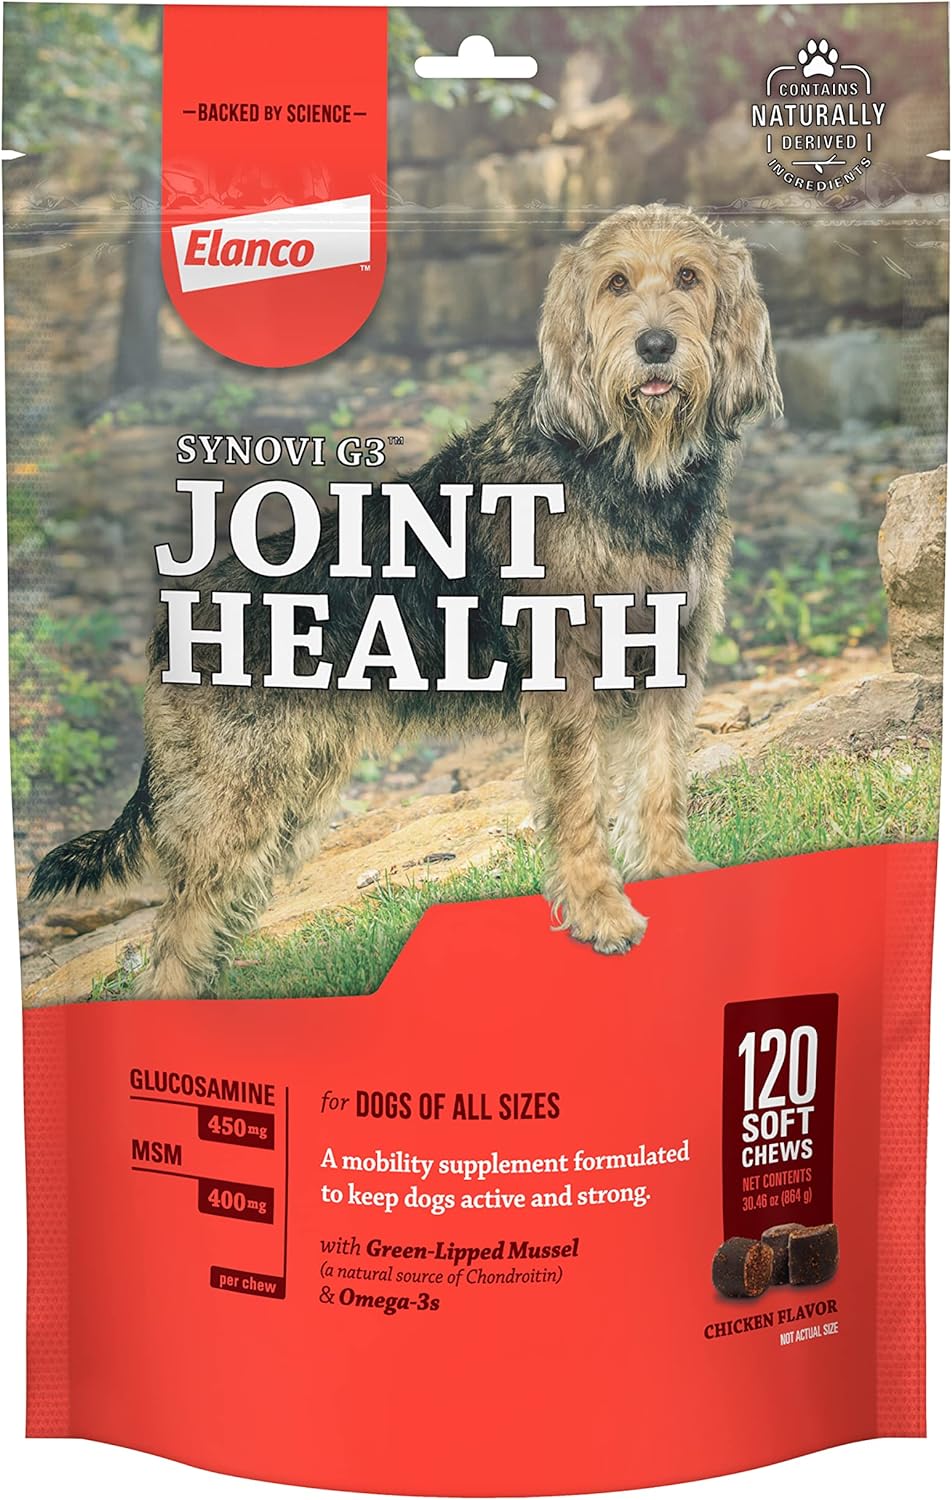 Elanco Synovi G3 Soft Chews Glucosamine Joint Supplement for Dogs, 120 count